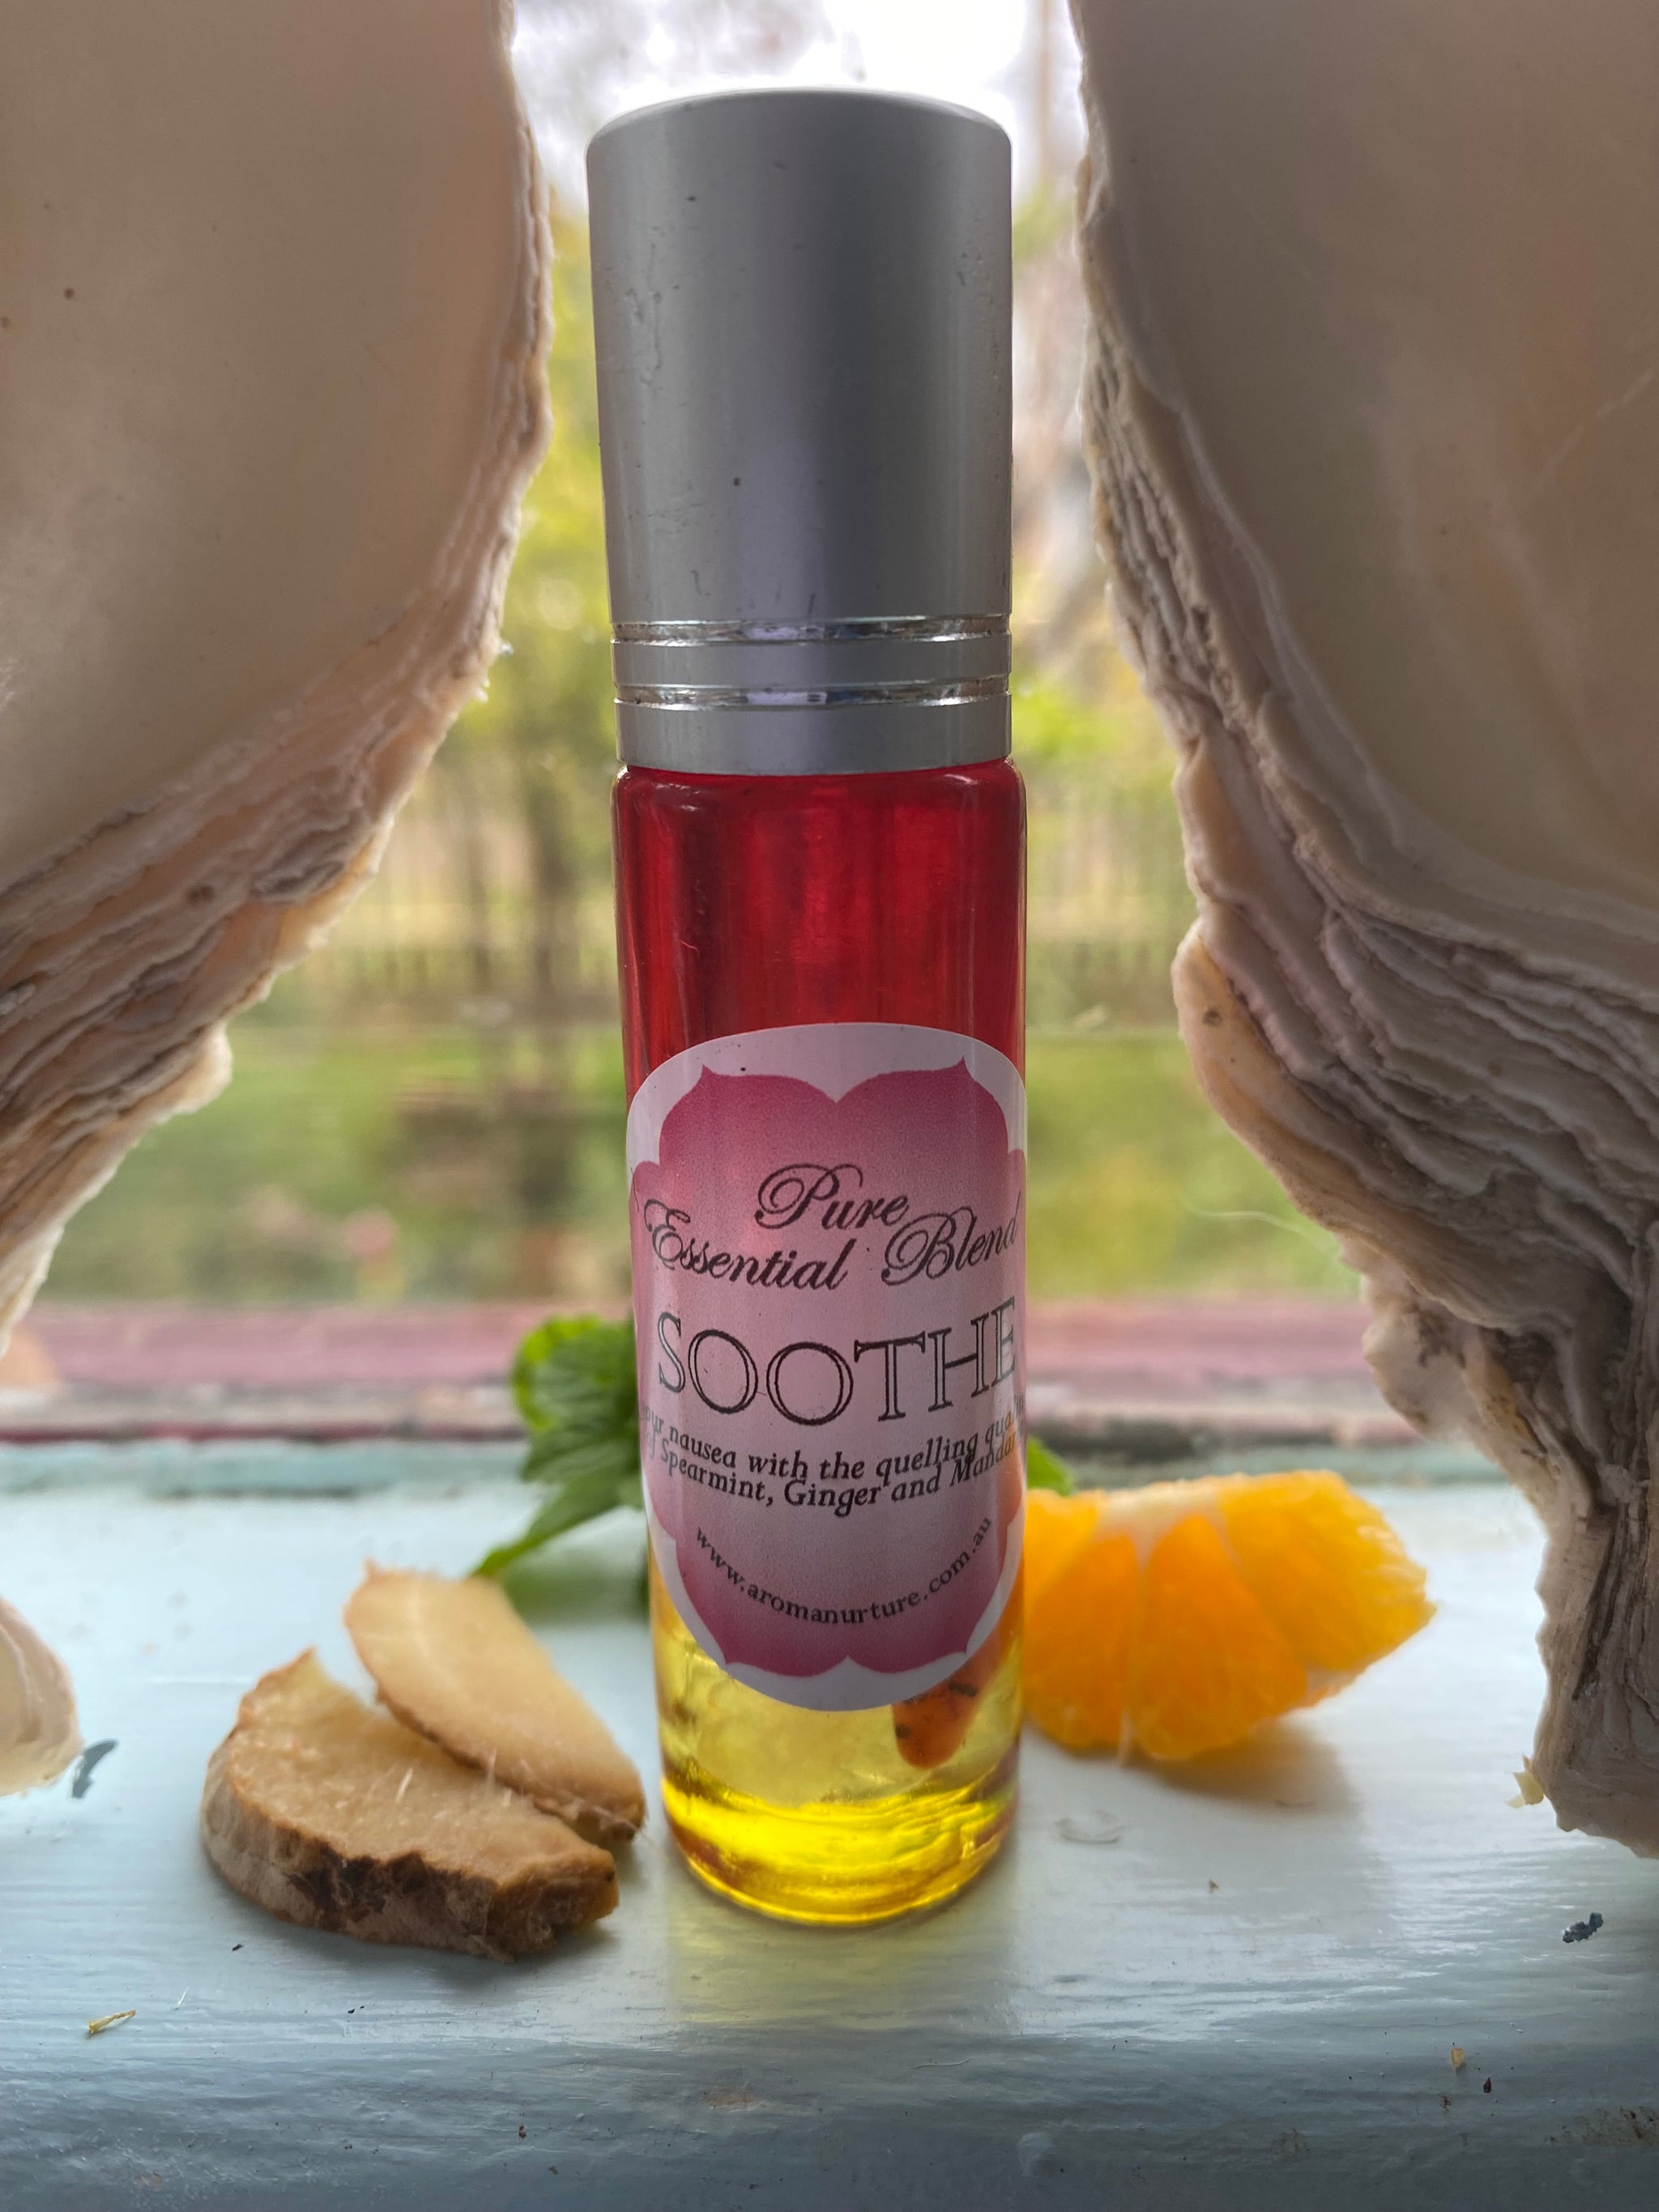 Soothe Roll-on Blend with Crystal chips.